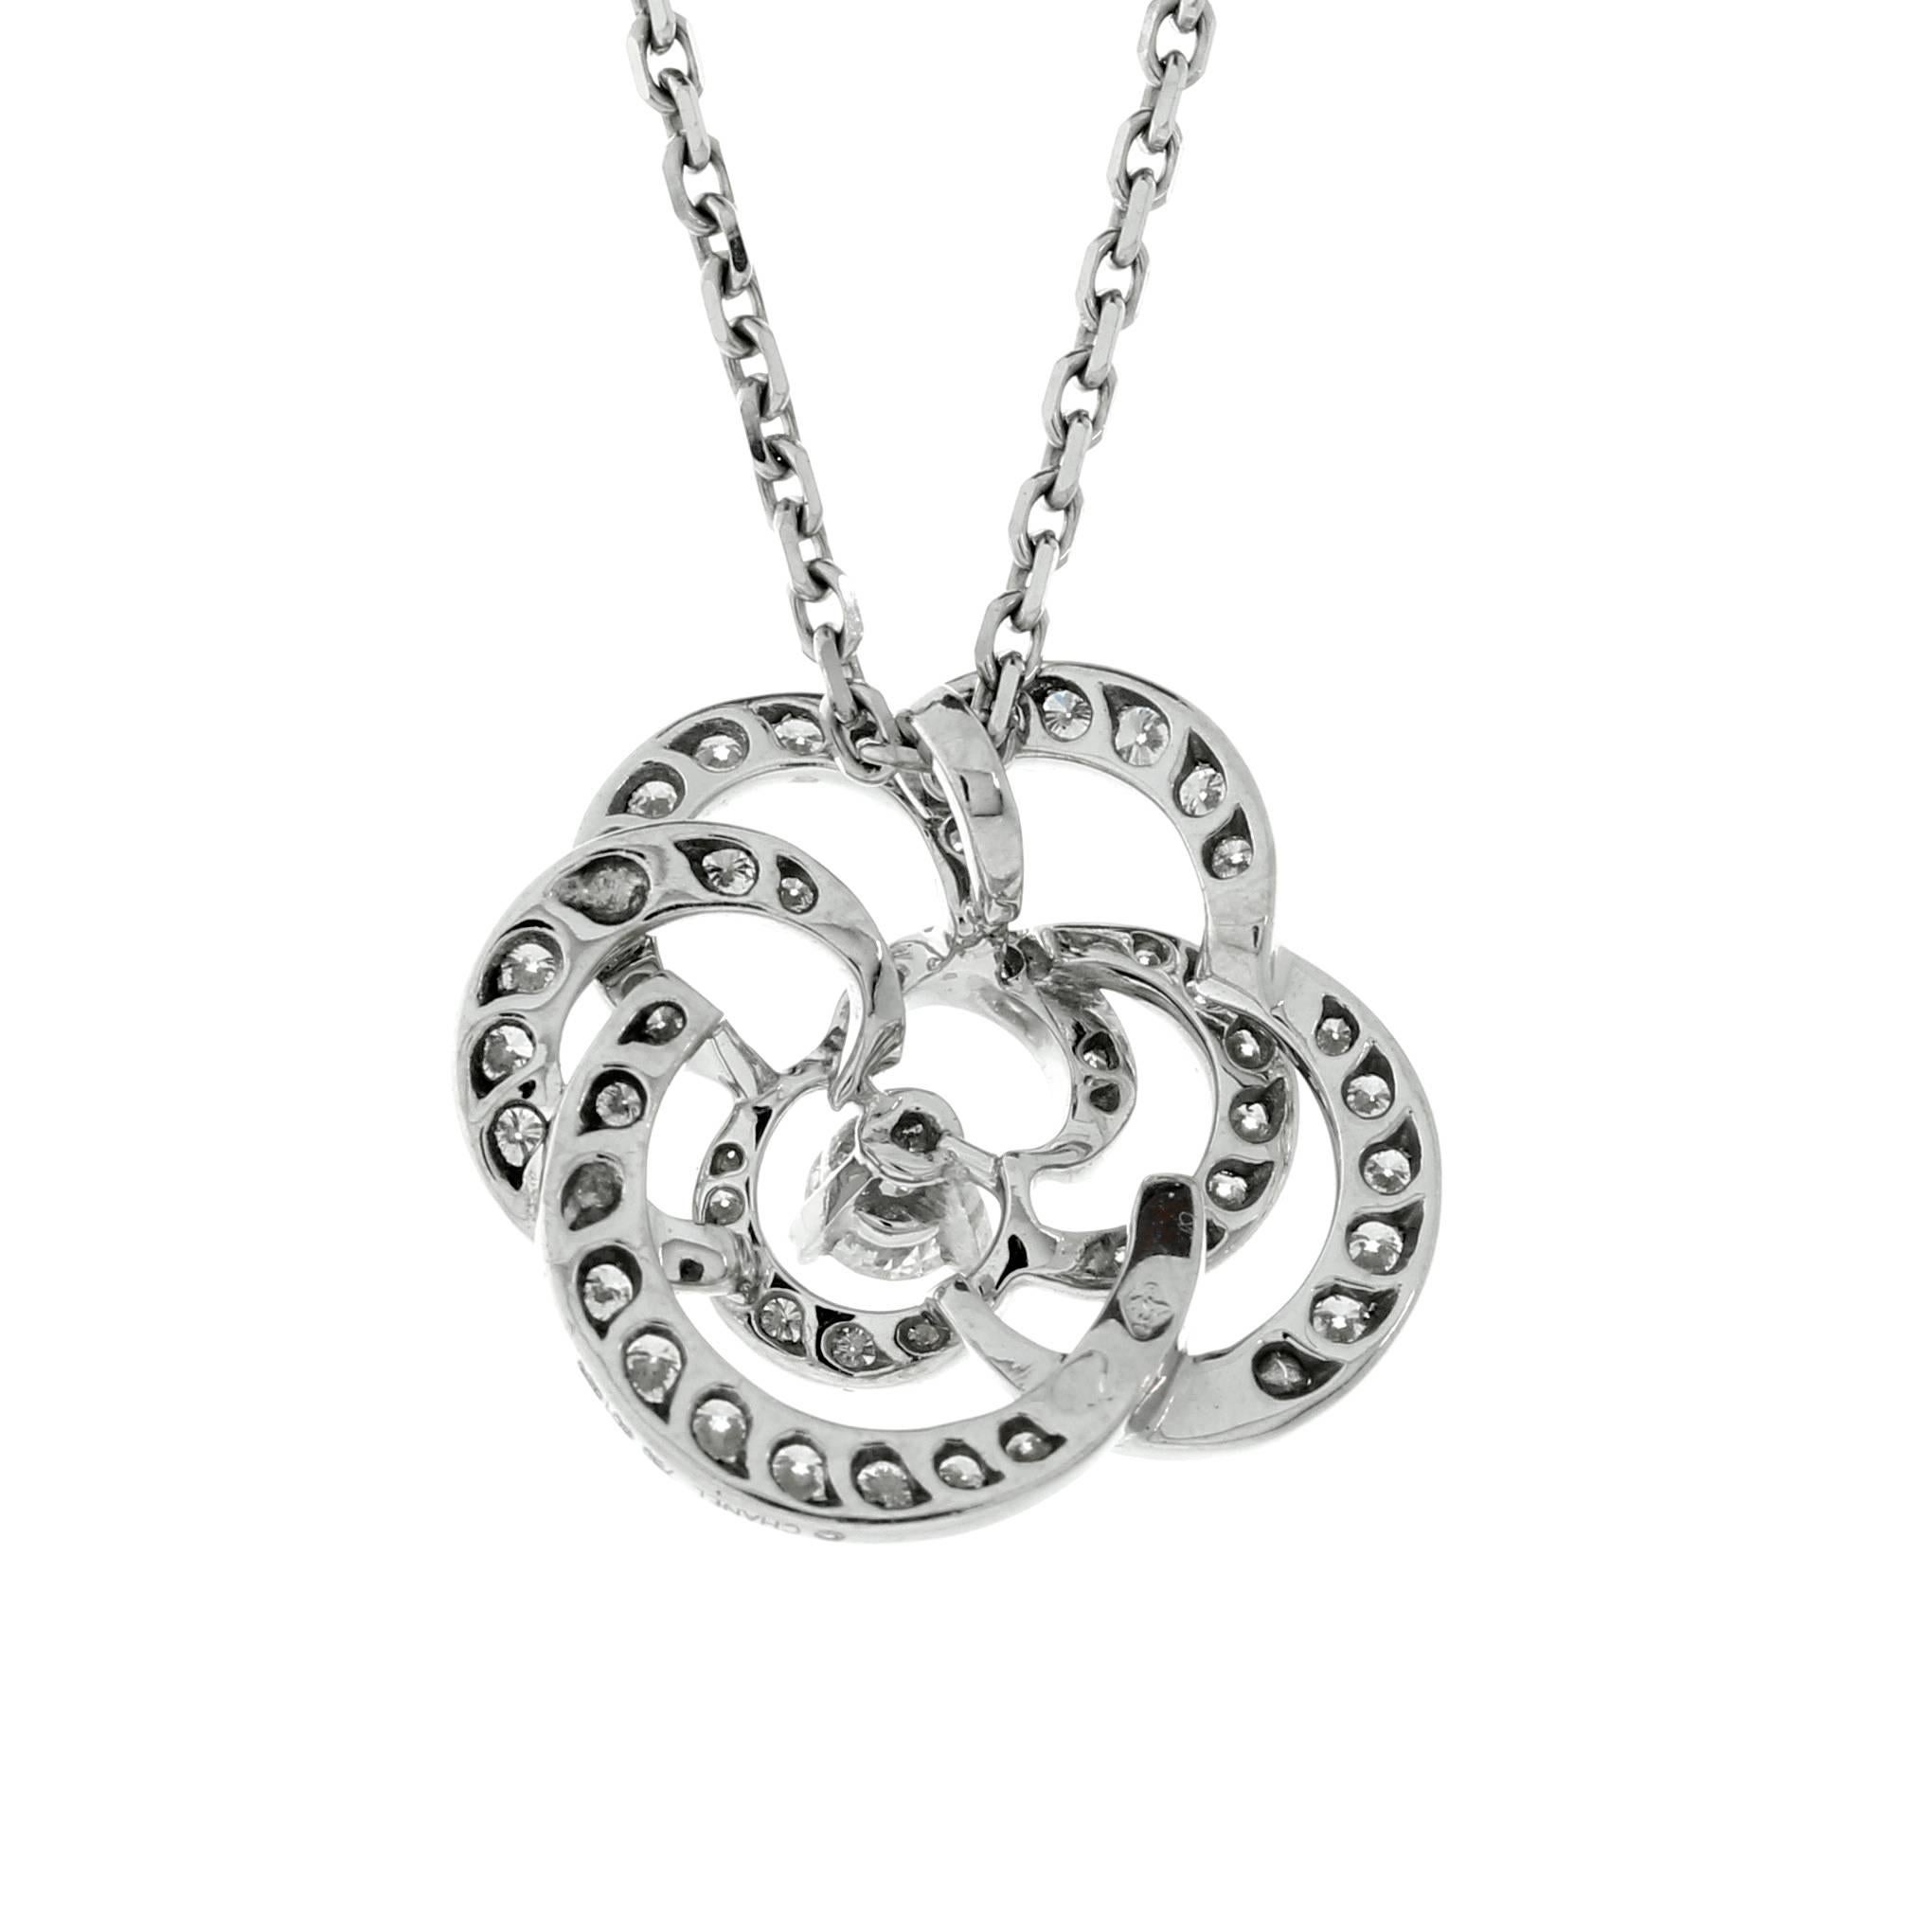 A fabulous Chanel necklace depicting a Camellia flower set with the finest Chanel round brilliant cut diamonds in 18k white gold.

Necklace Length: 16